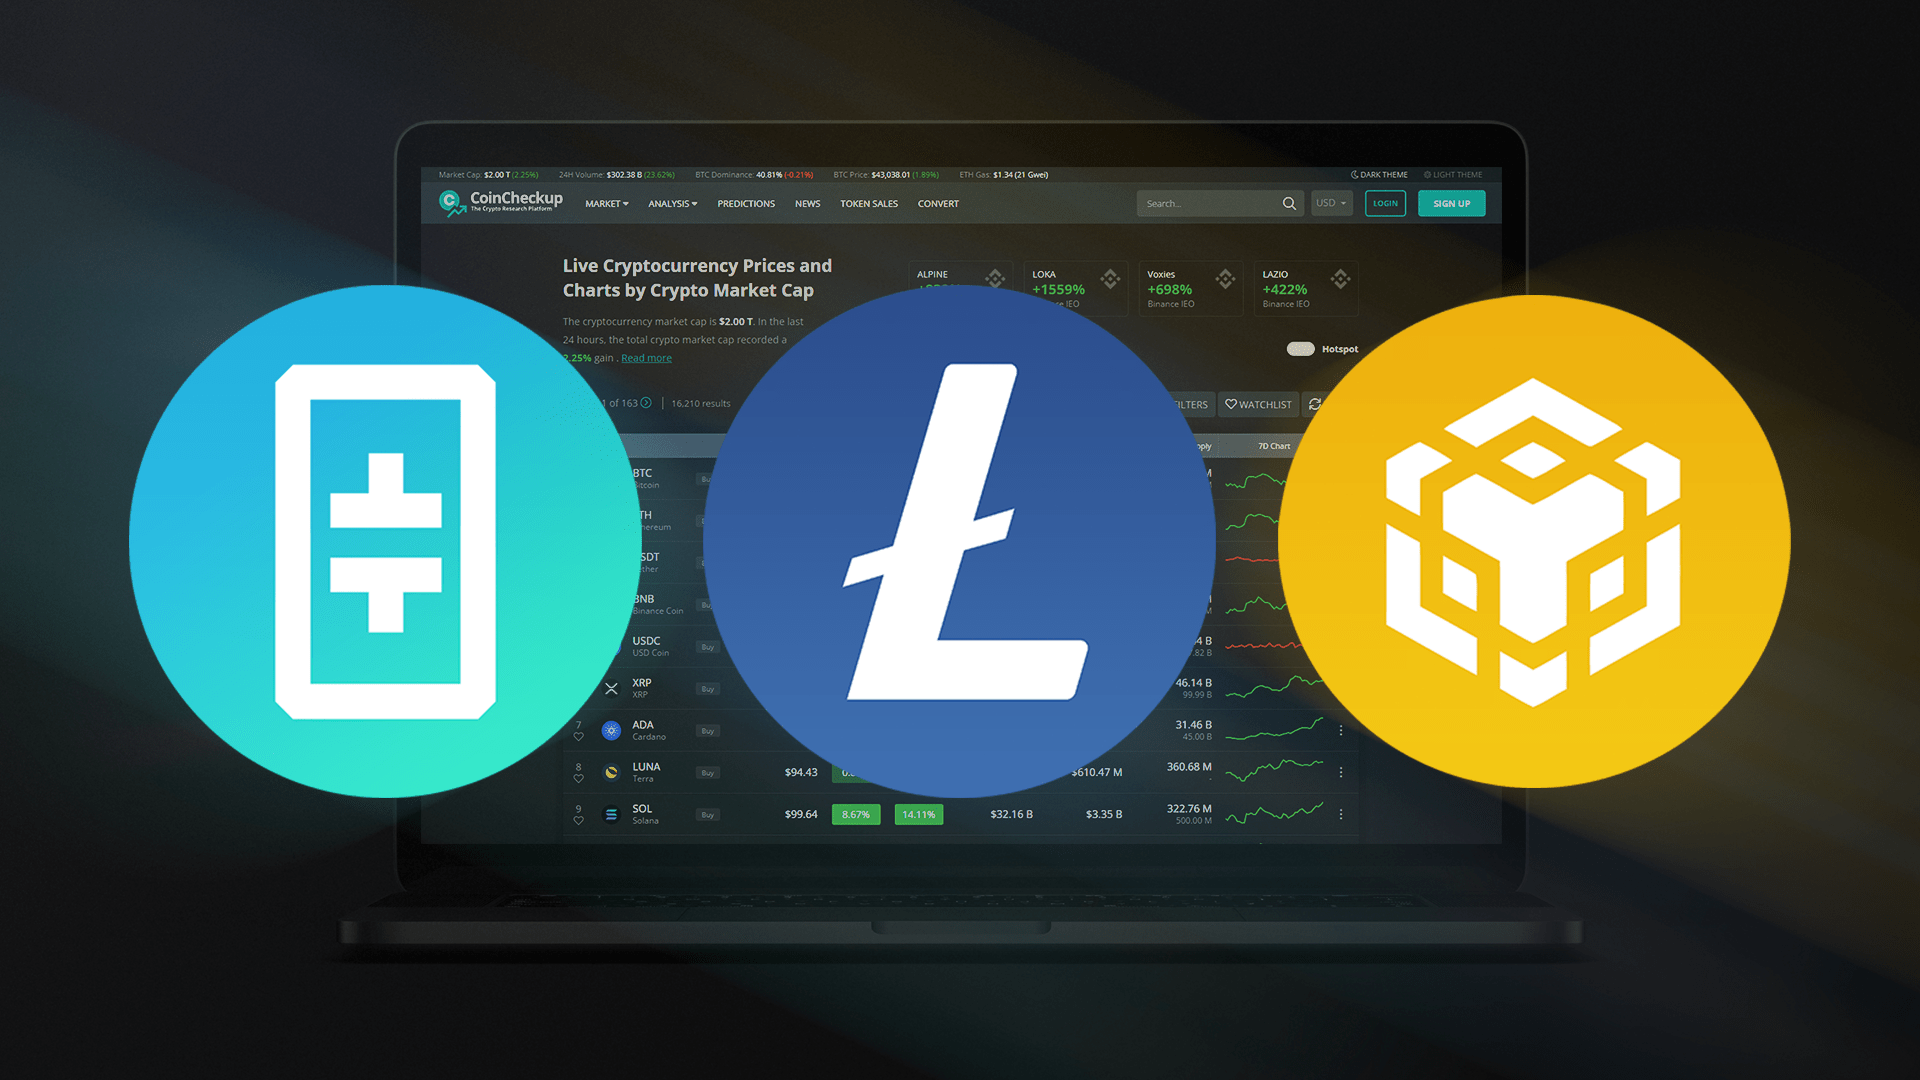 Litecoin Ranks #2 as LTC’s price breaks away from the market average downtrend — Top 3 Coins to Watch for Nov 28 — Dec 4